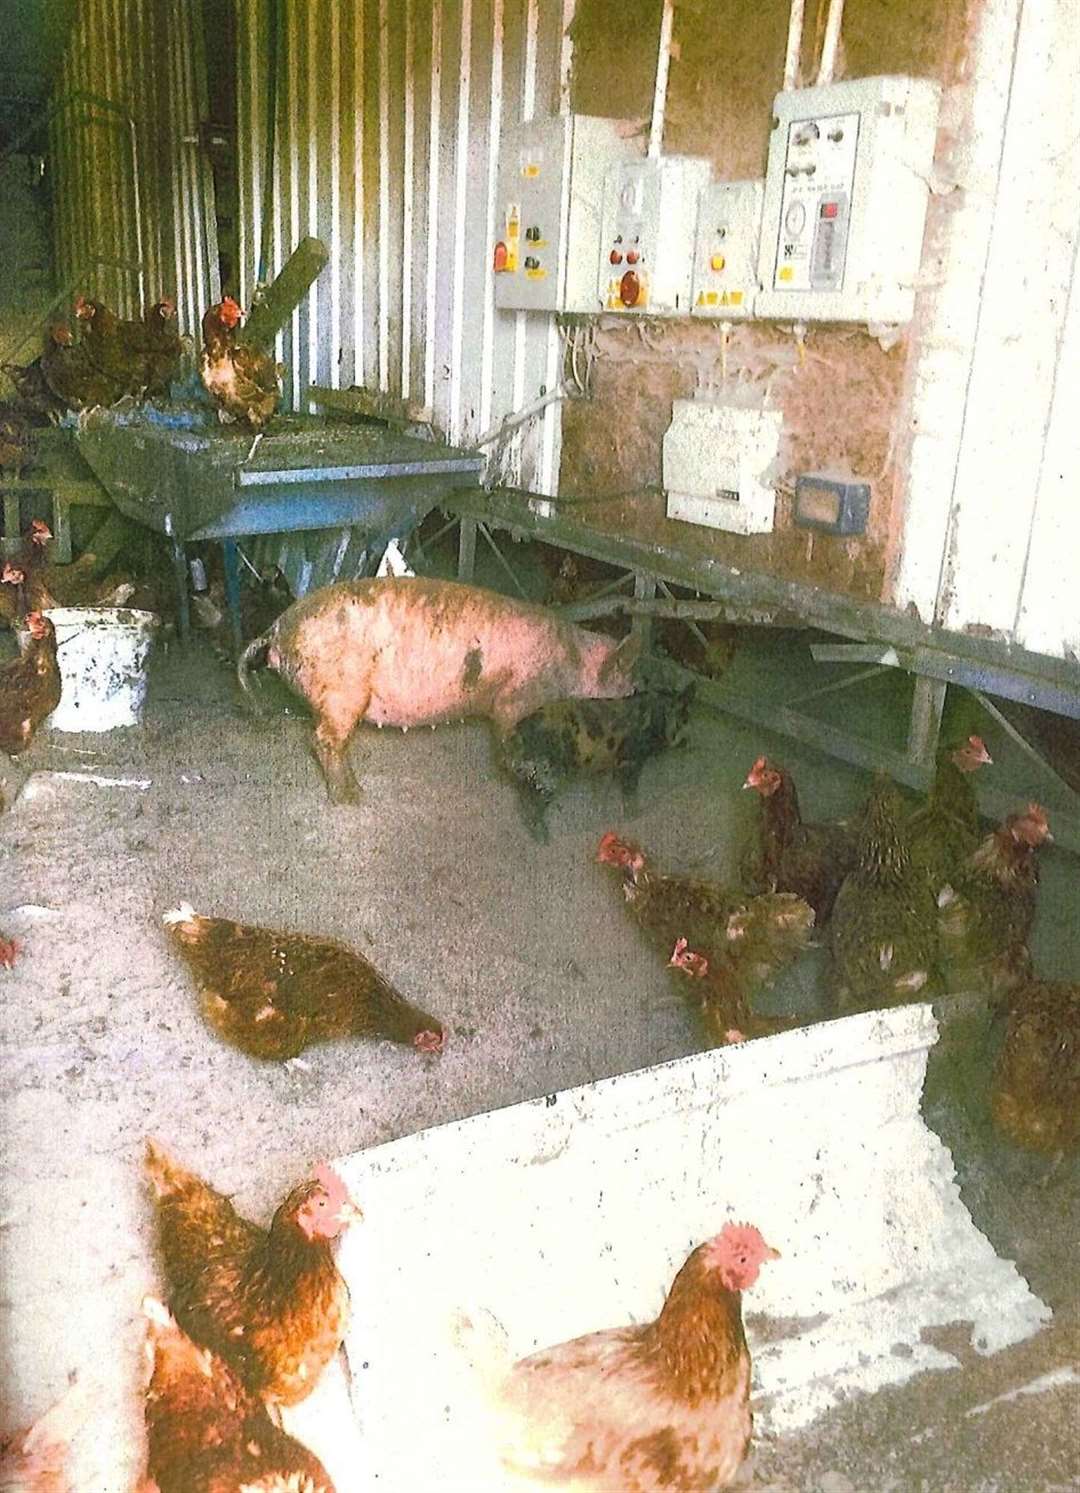 Pigs were allowed access to the chicken barns, causing further devastation. Picture: Crown Office